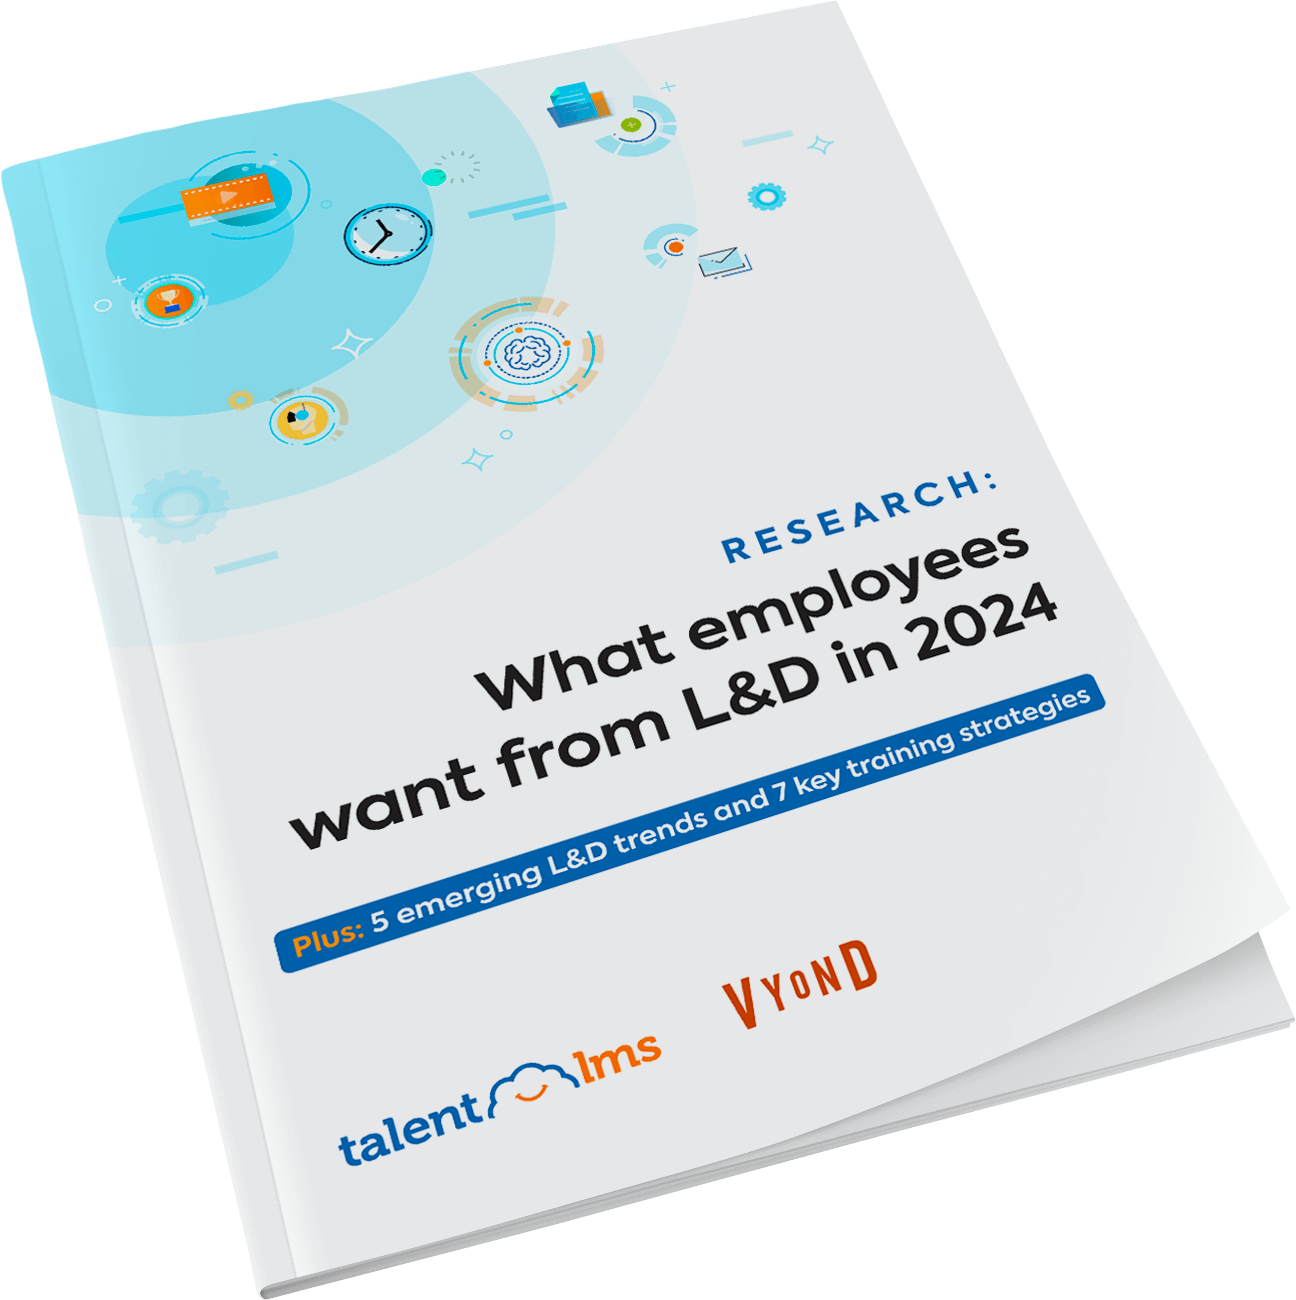 What employees want from L&D in 2024 research report cover